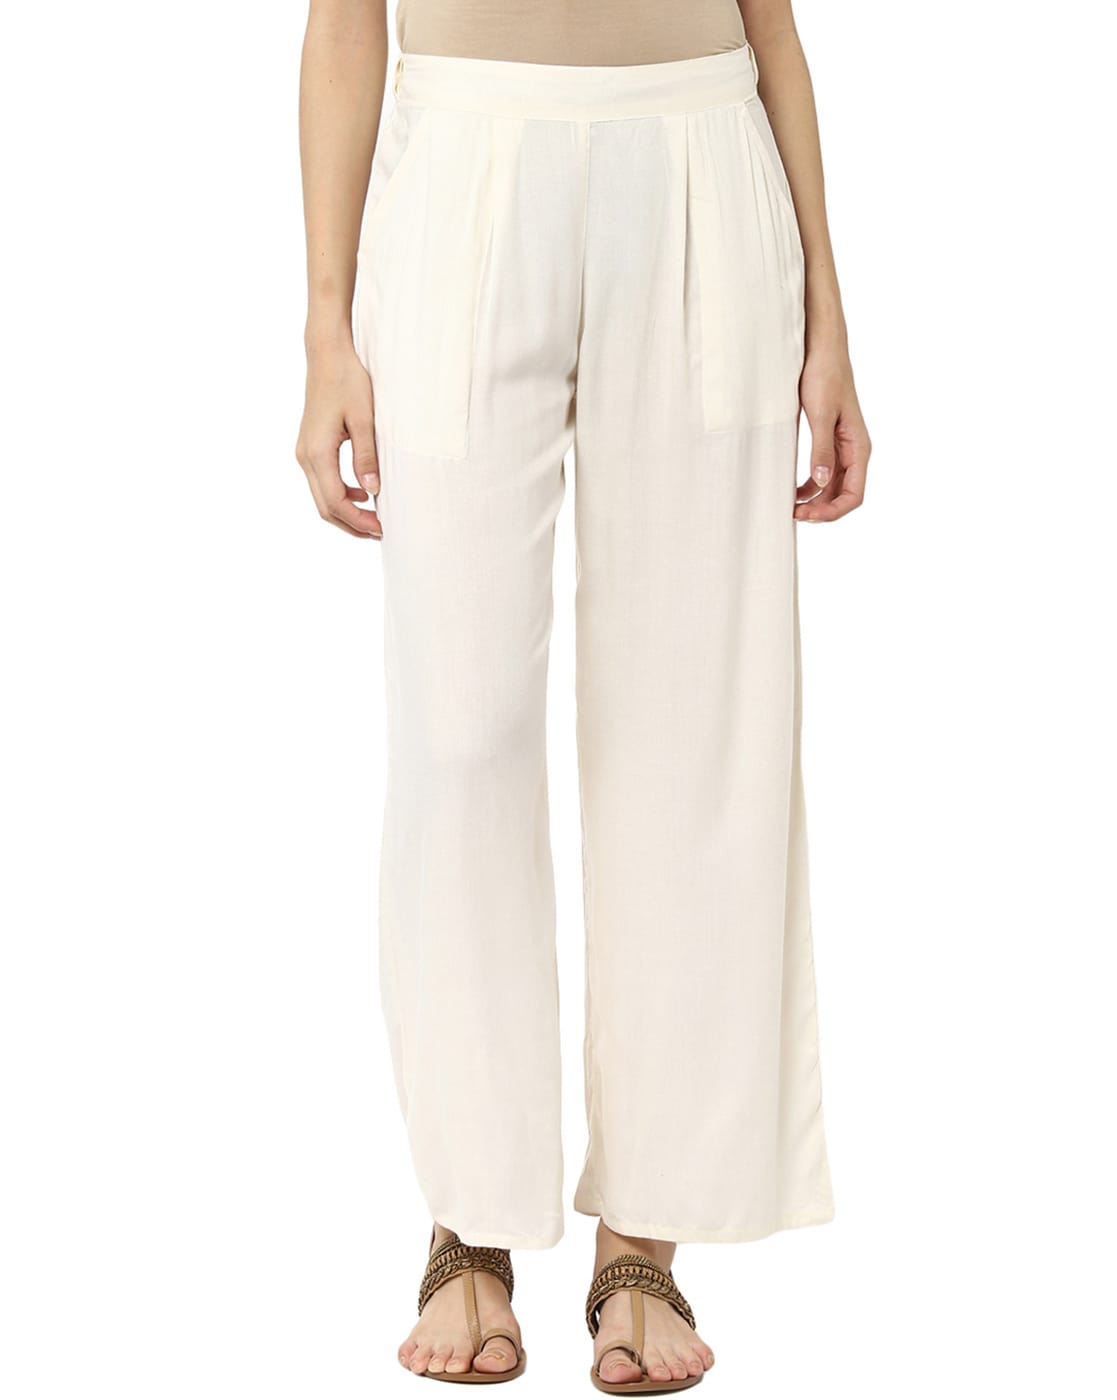 Buy Off White Trousers & Pants for Women by Jaipur Kurti Online